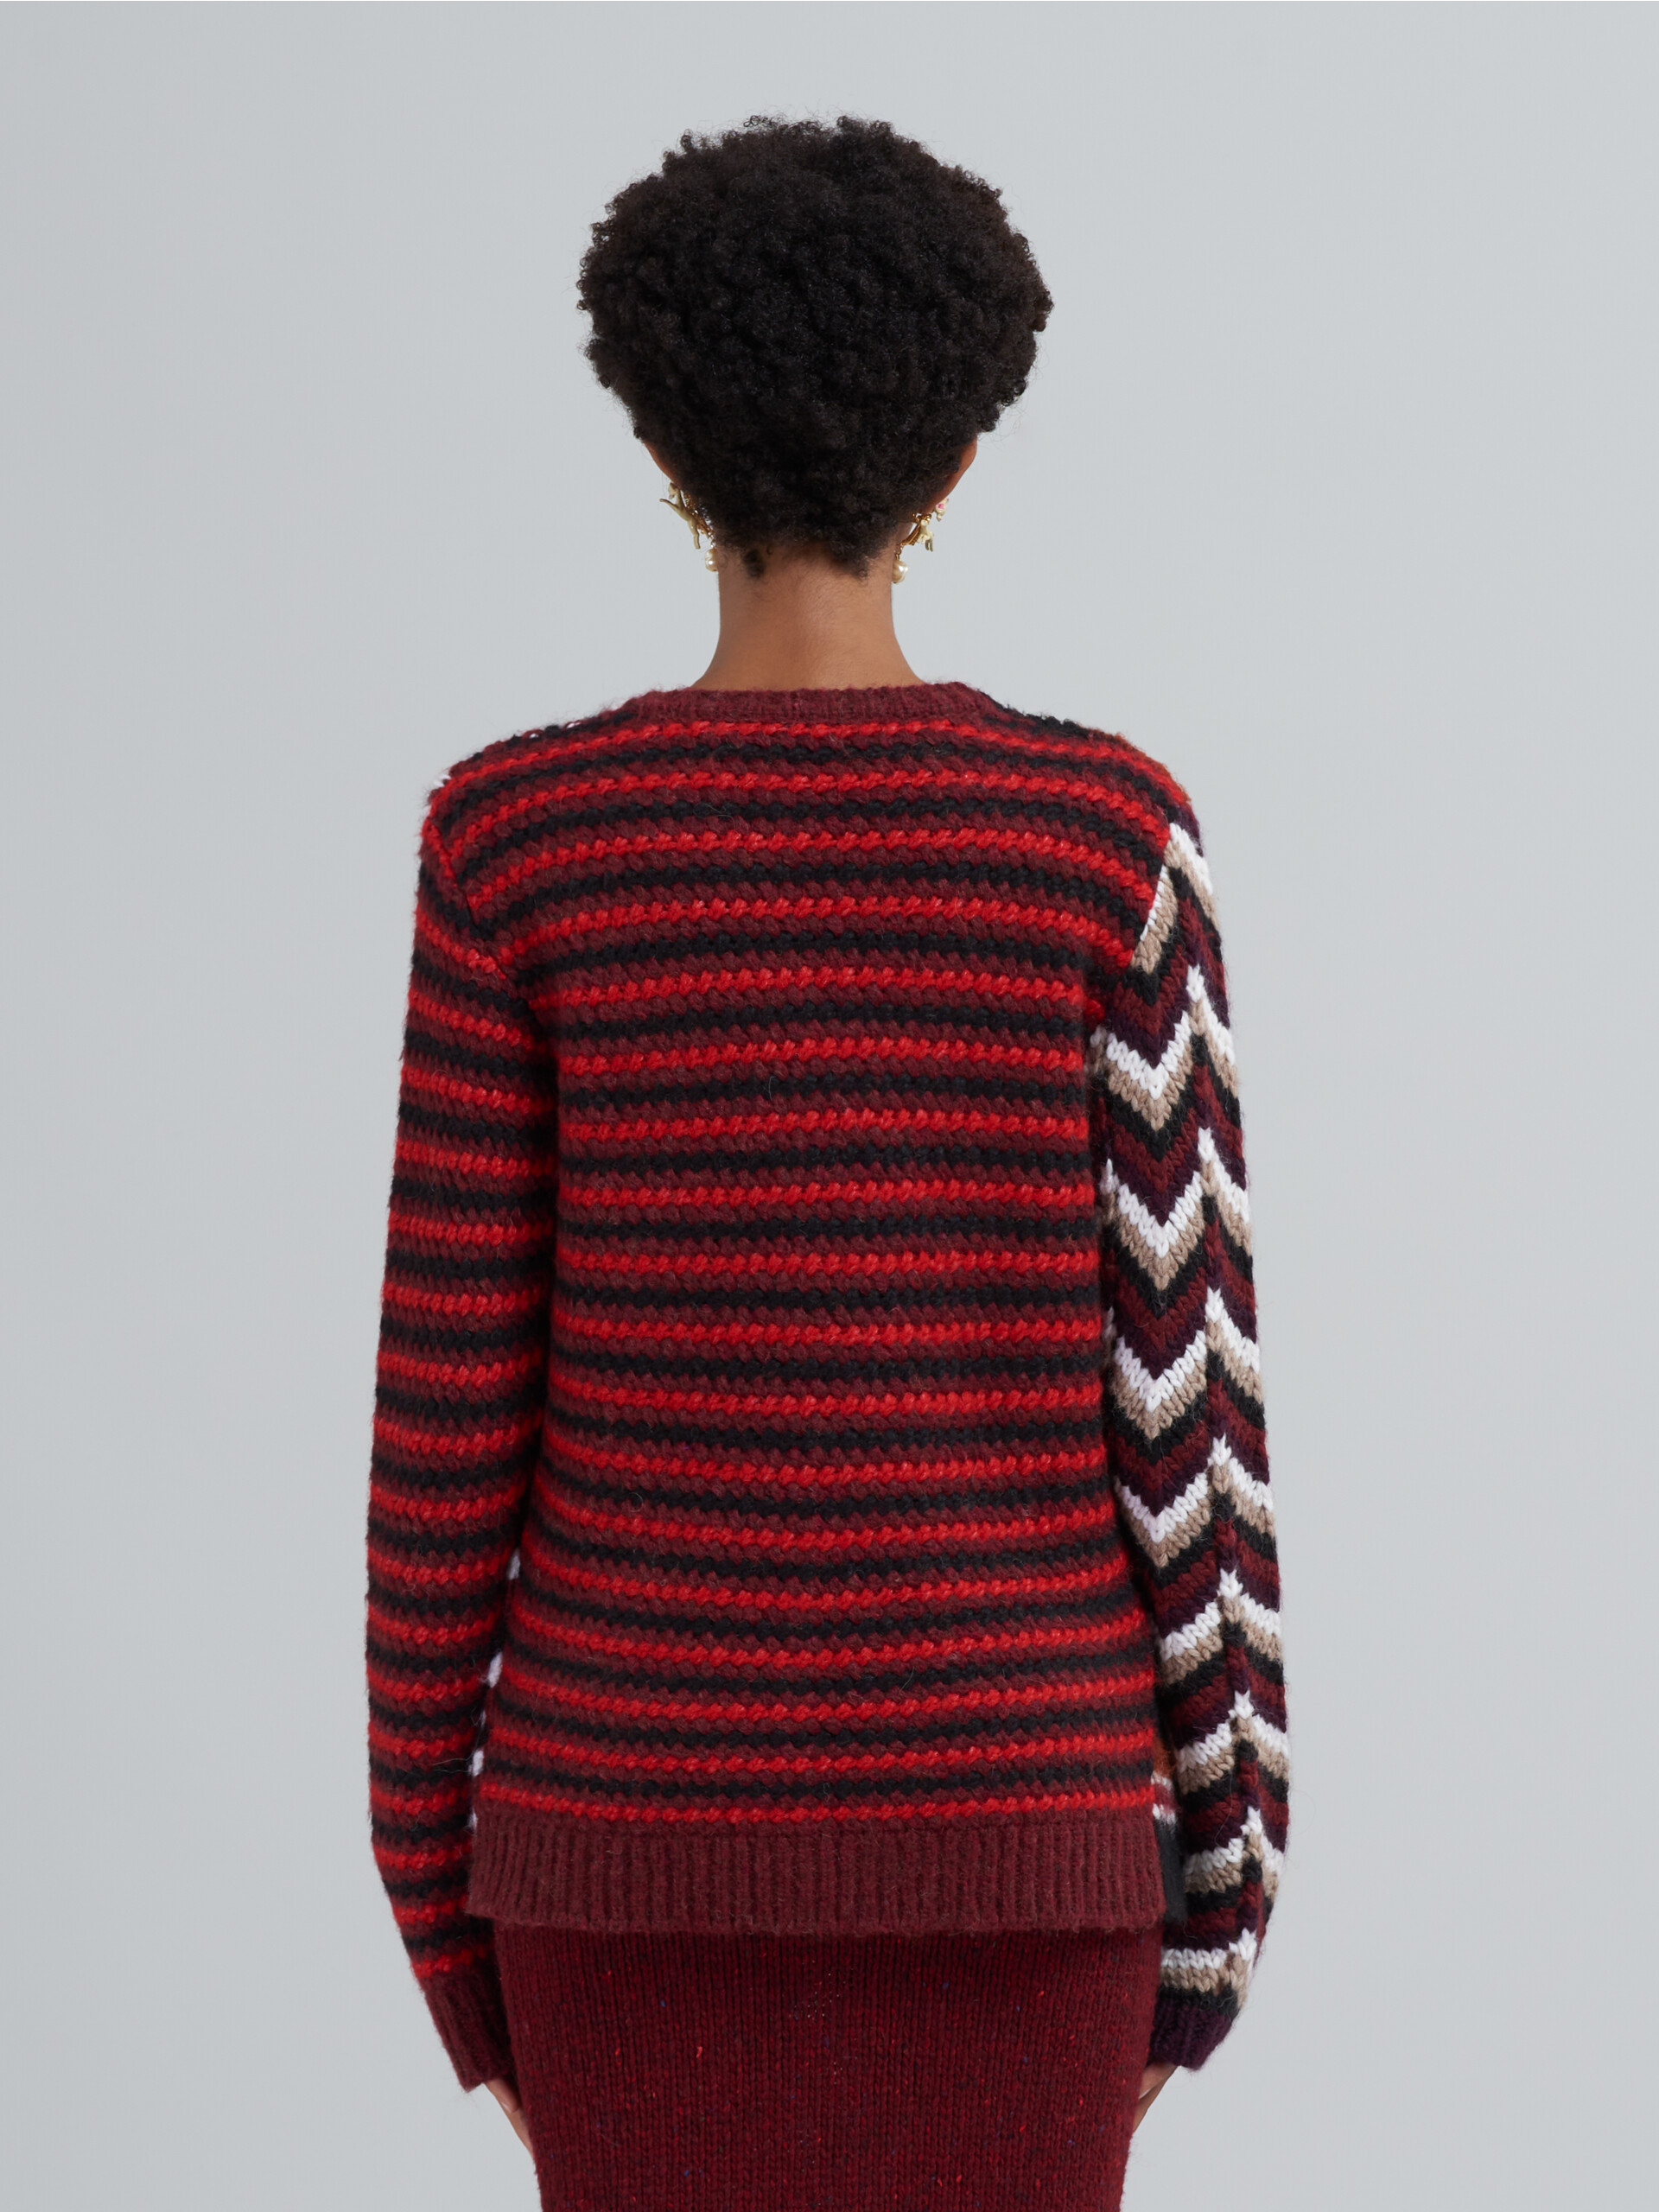 3D-stitch sweater in blended yarns - Pullovers - Image 3